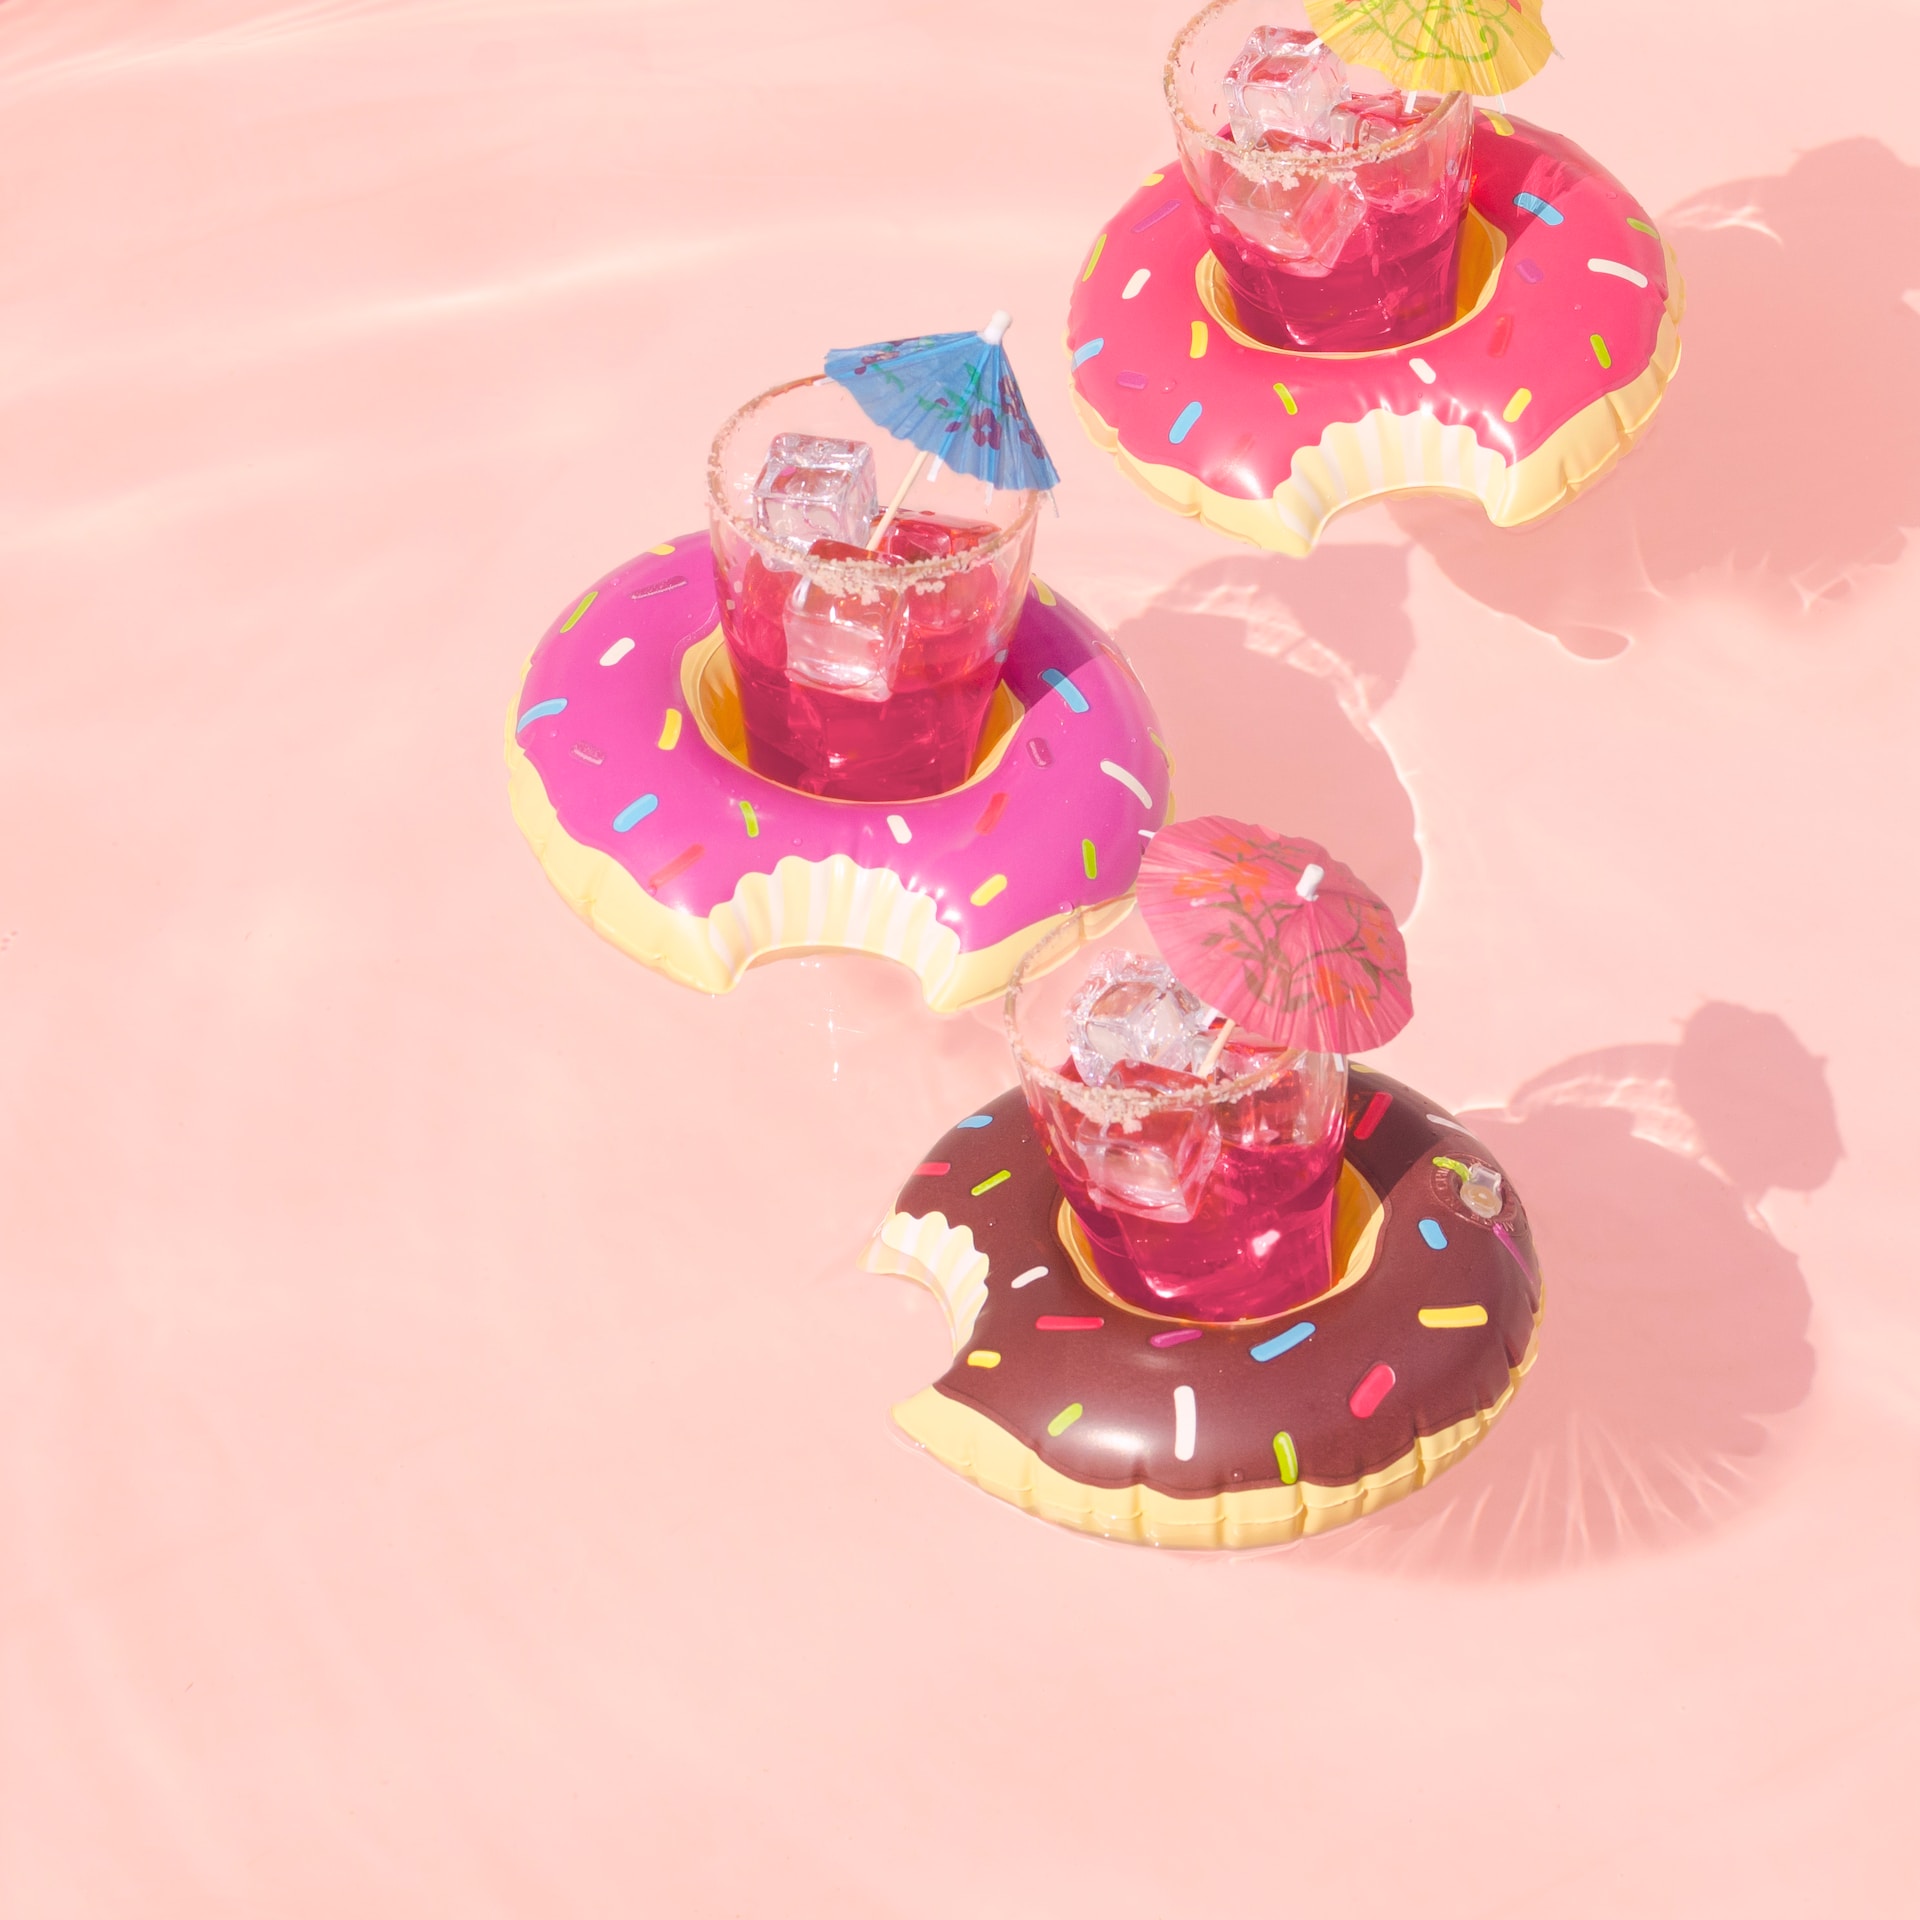 A fun image of bright pink rosé cocktails floating in donut-shaped floats in a light pink pool.